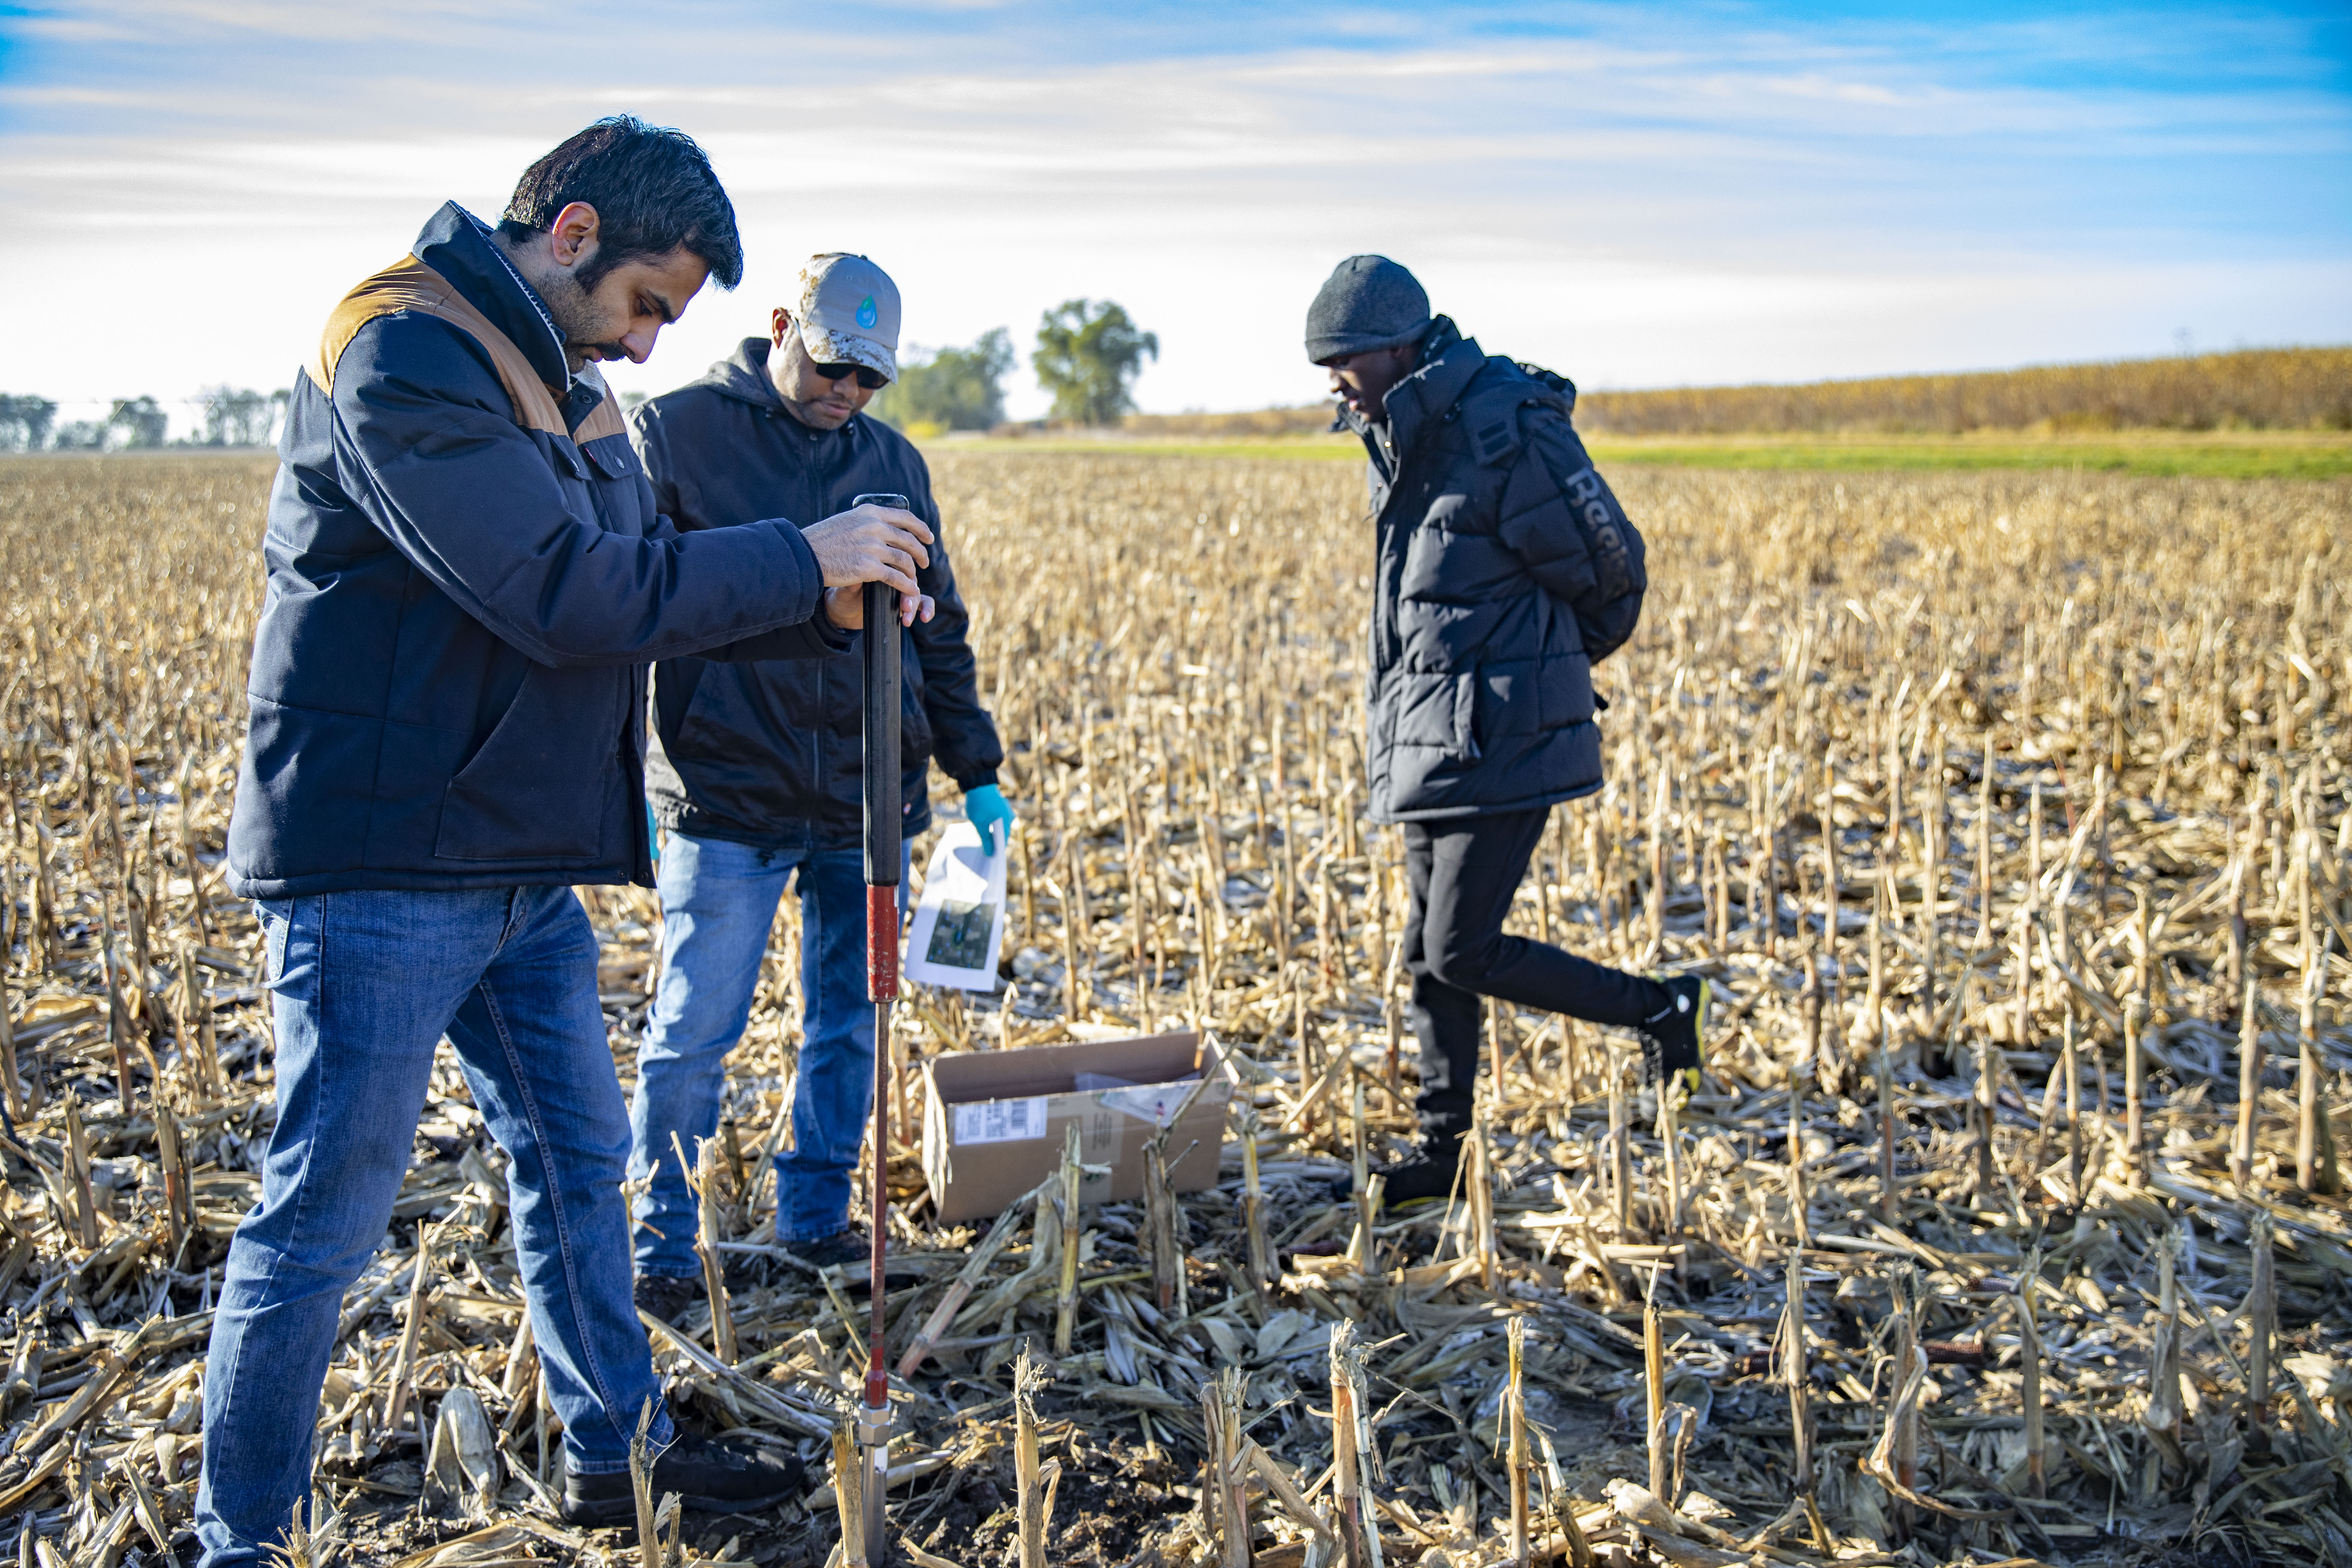 A research team from the University of Nebraska-Lincoln digs into a cornfield near Mead, NE in November to collect soil samples. The team is part of a larger research collaboration to understand the breadth and depth of contamination from the AltEn ethano